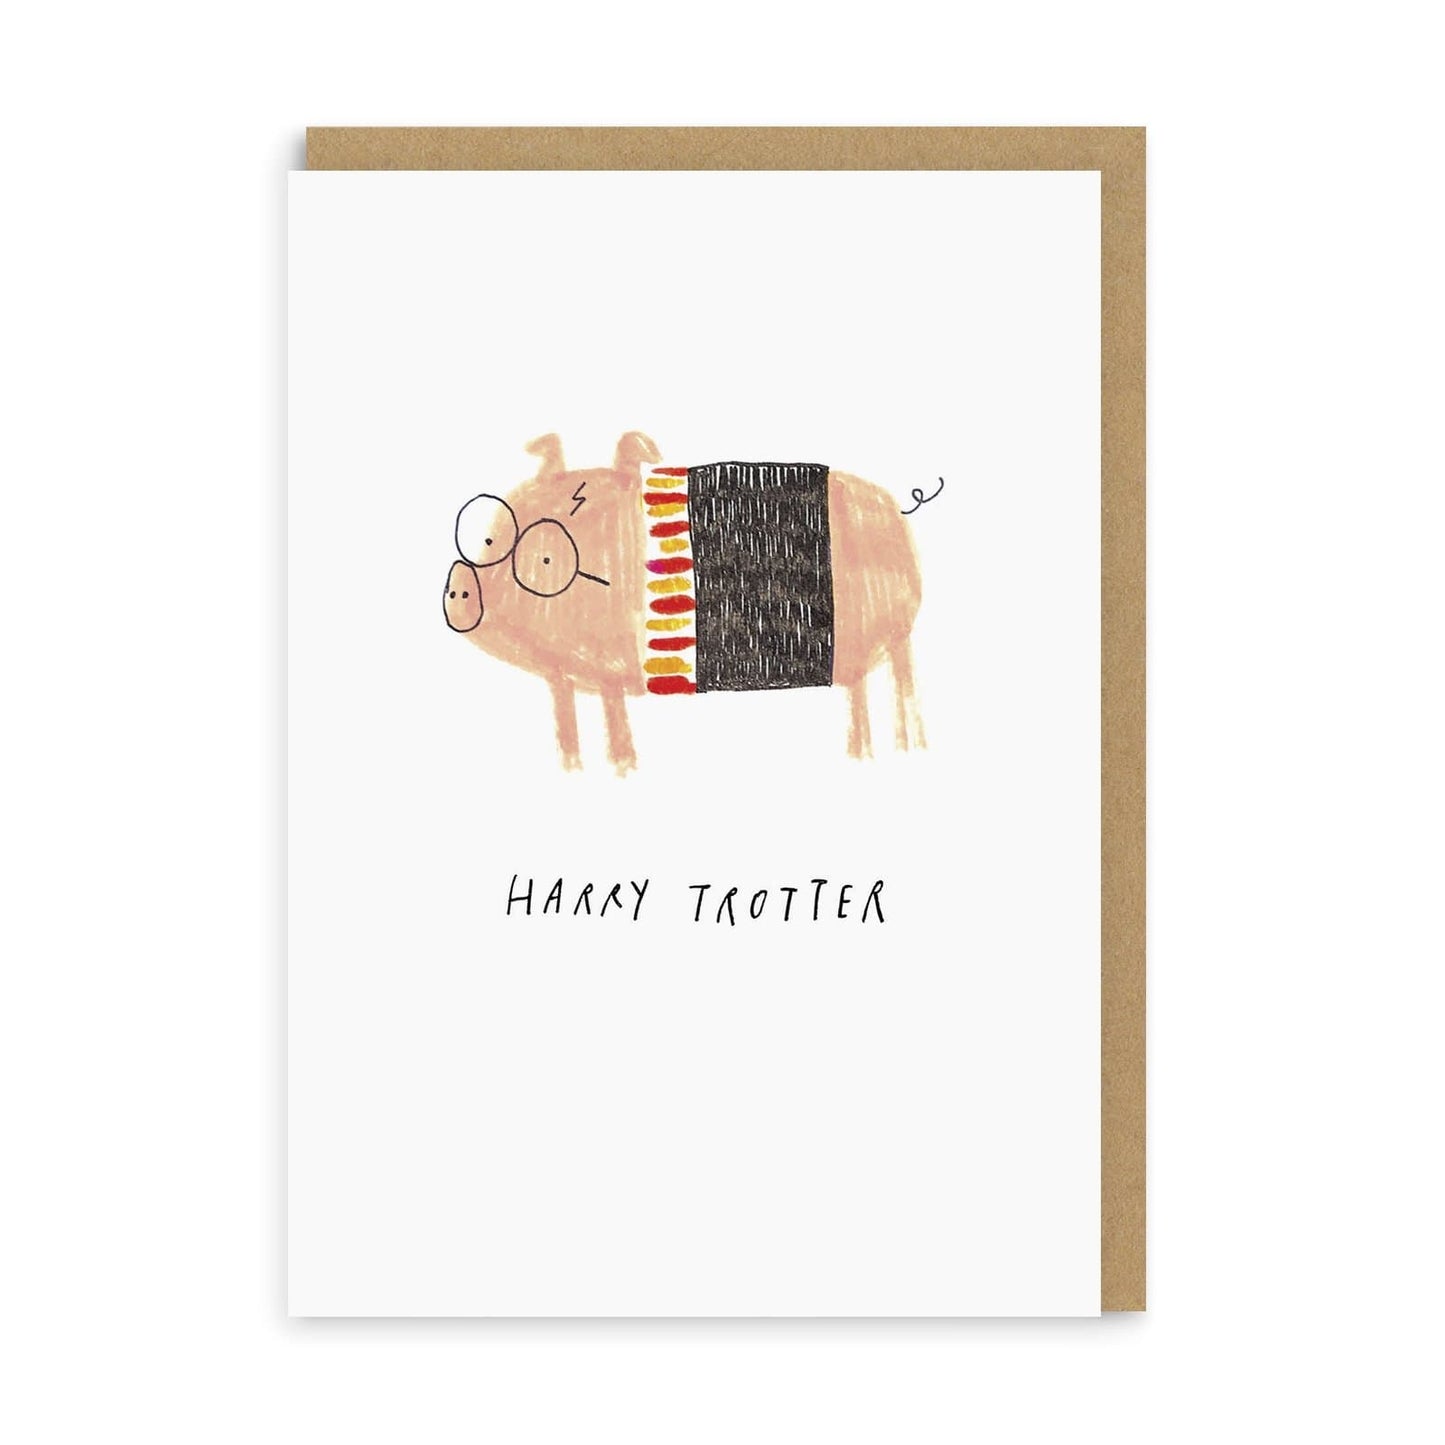 Harry Trotter Greeting Card